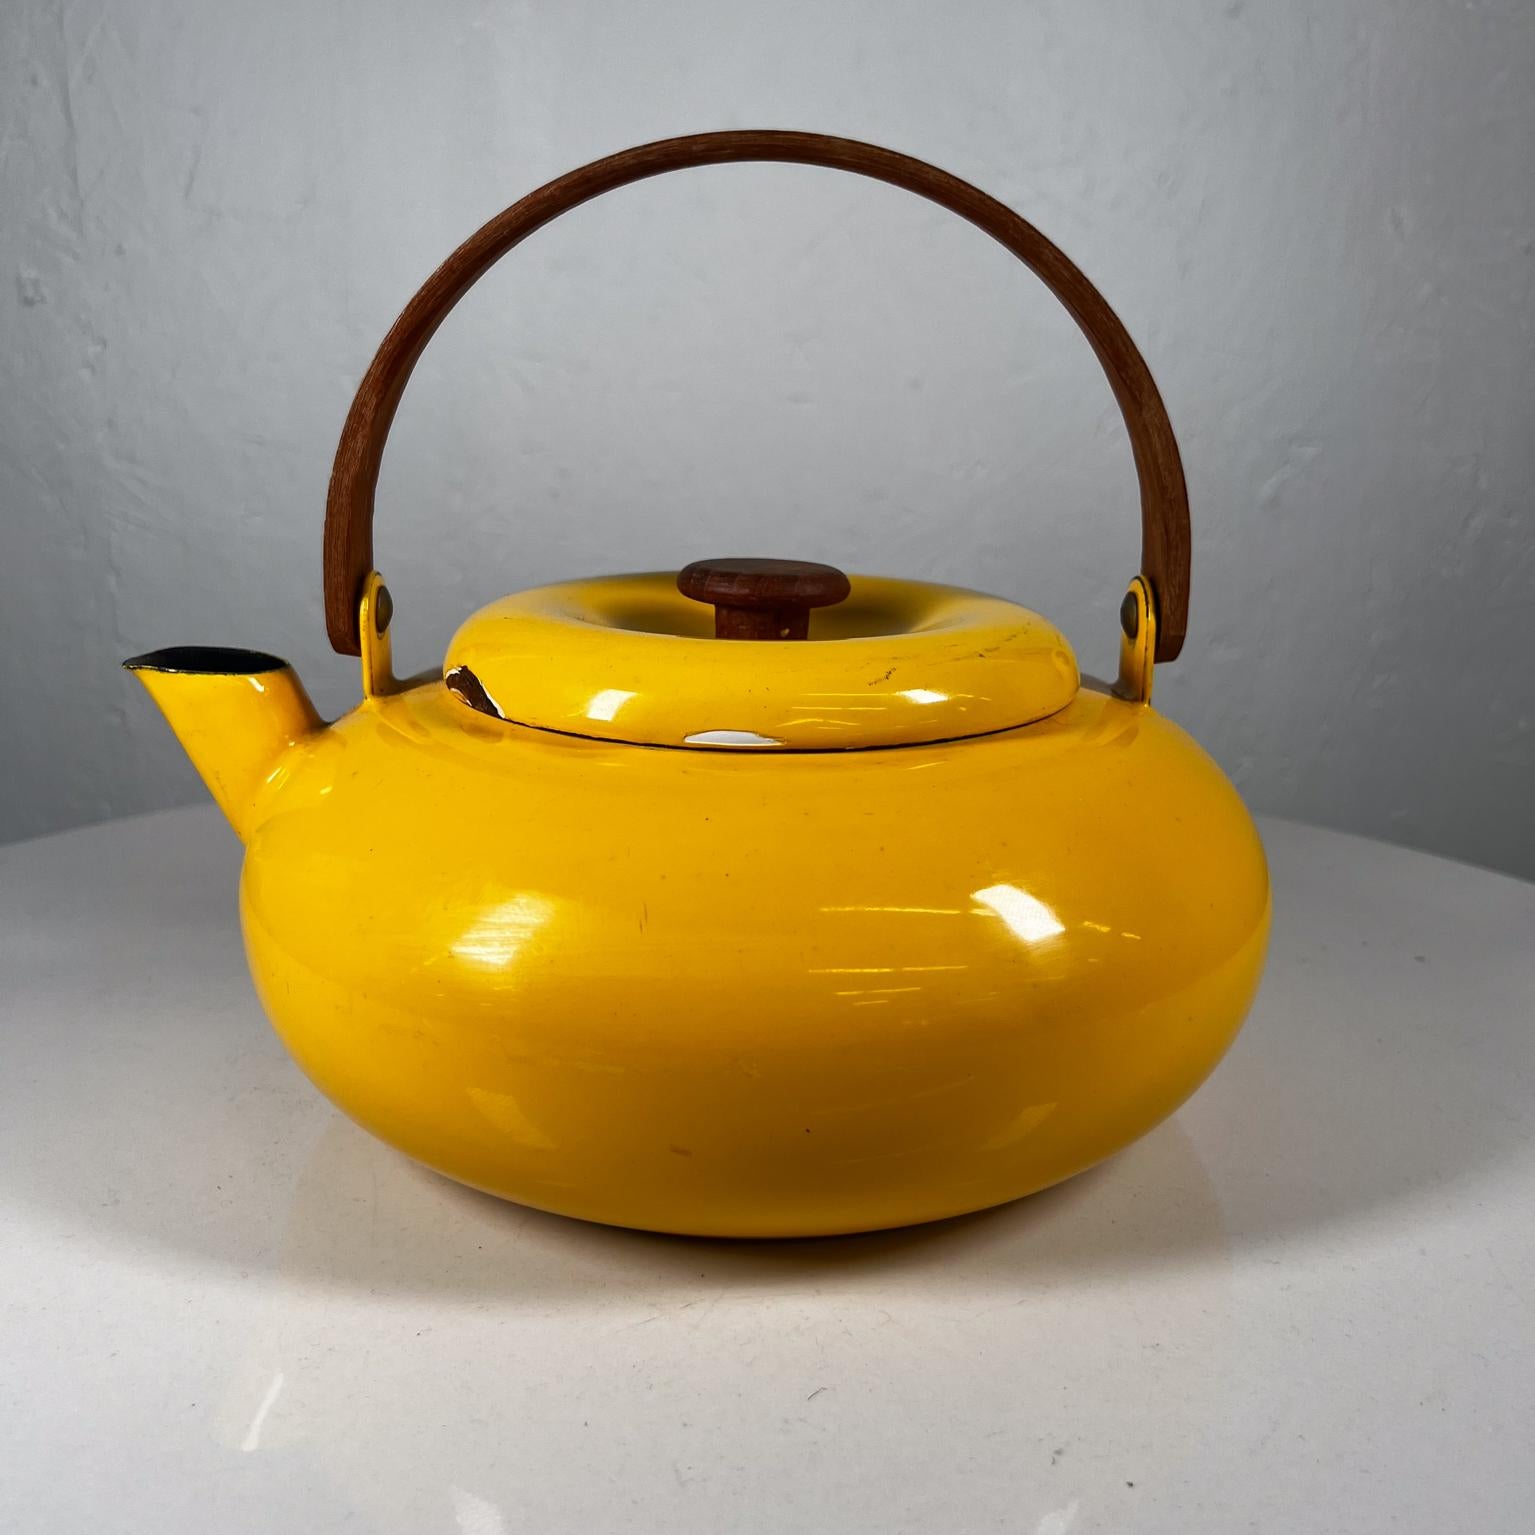 1980s Sam Lebowitz Yellow Enamel Tea Kettle 
Copco Japan
Stamped by designer.
9.5 d x 8.5 w x 8.5 h
Preowned original vintage condition
See all images provided.